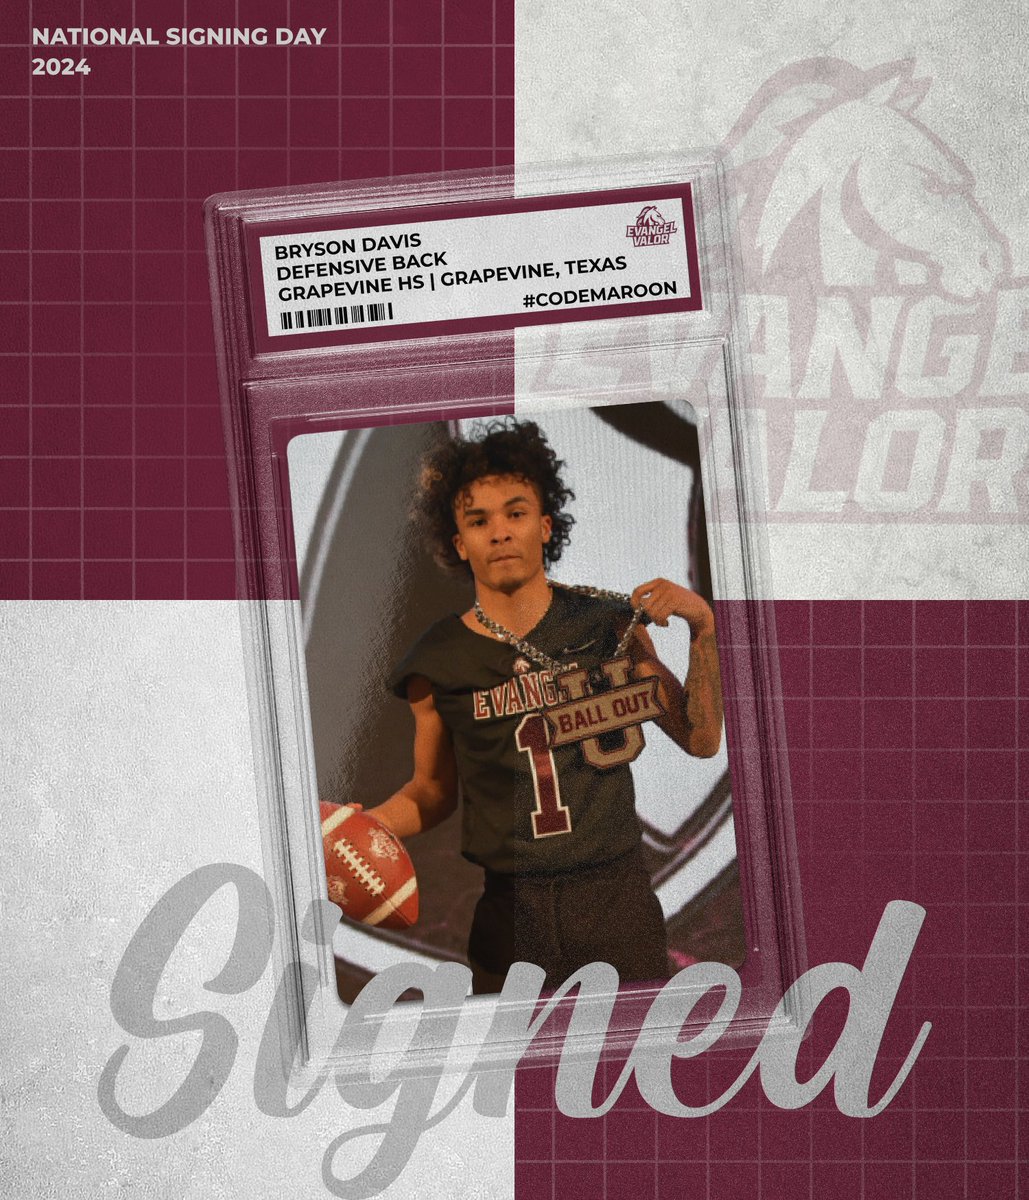 Welcome Bryson Davis to the Evangel Family! ✍️ 🏈: Defensive Back 🏫: Grapevine HS 📍: Grapevine, Texas #CodeMaroon // #NSD24